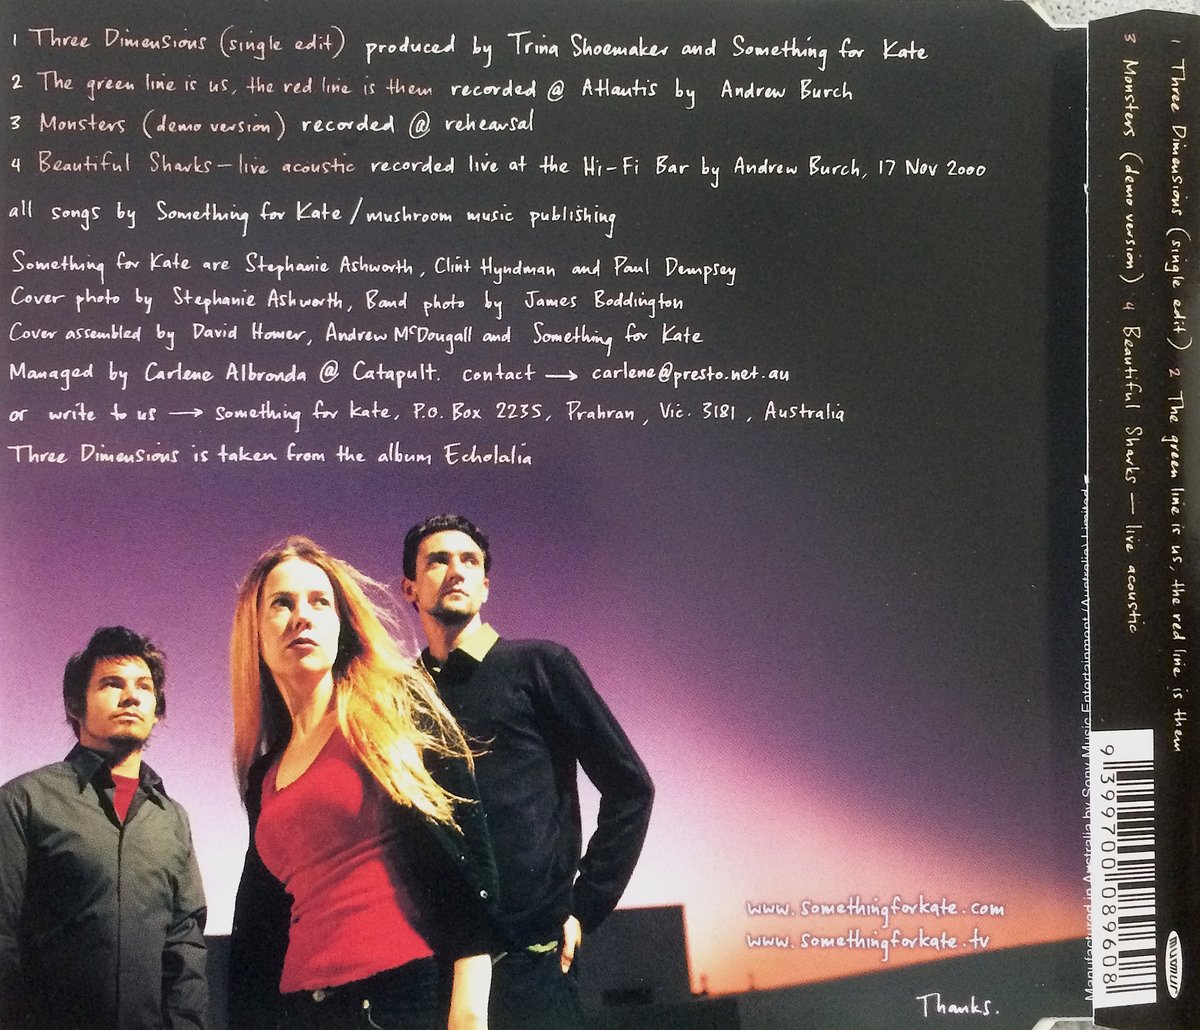 Image of Something for Kate -'Three Dimensions' CD single Original